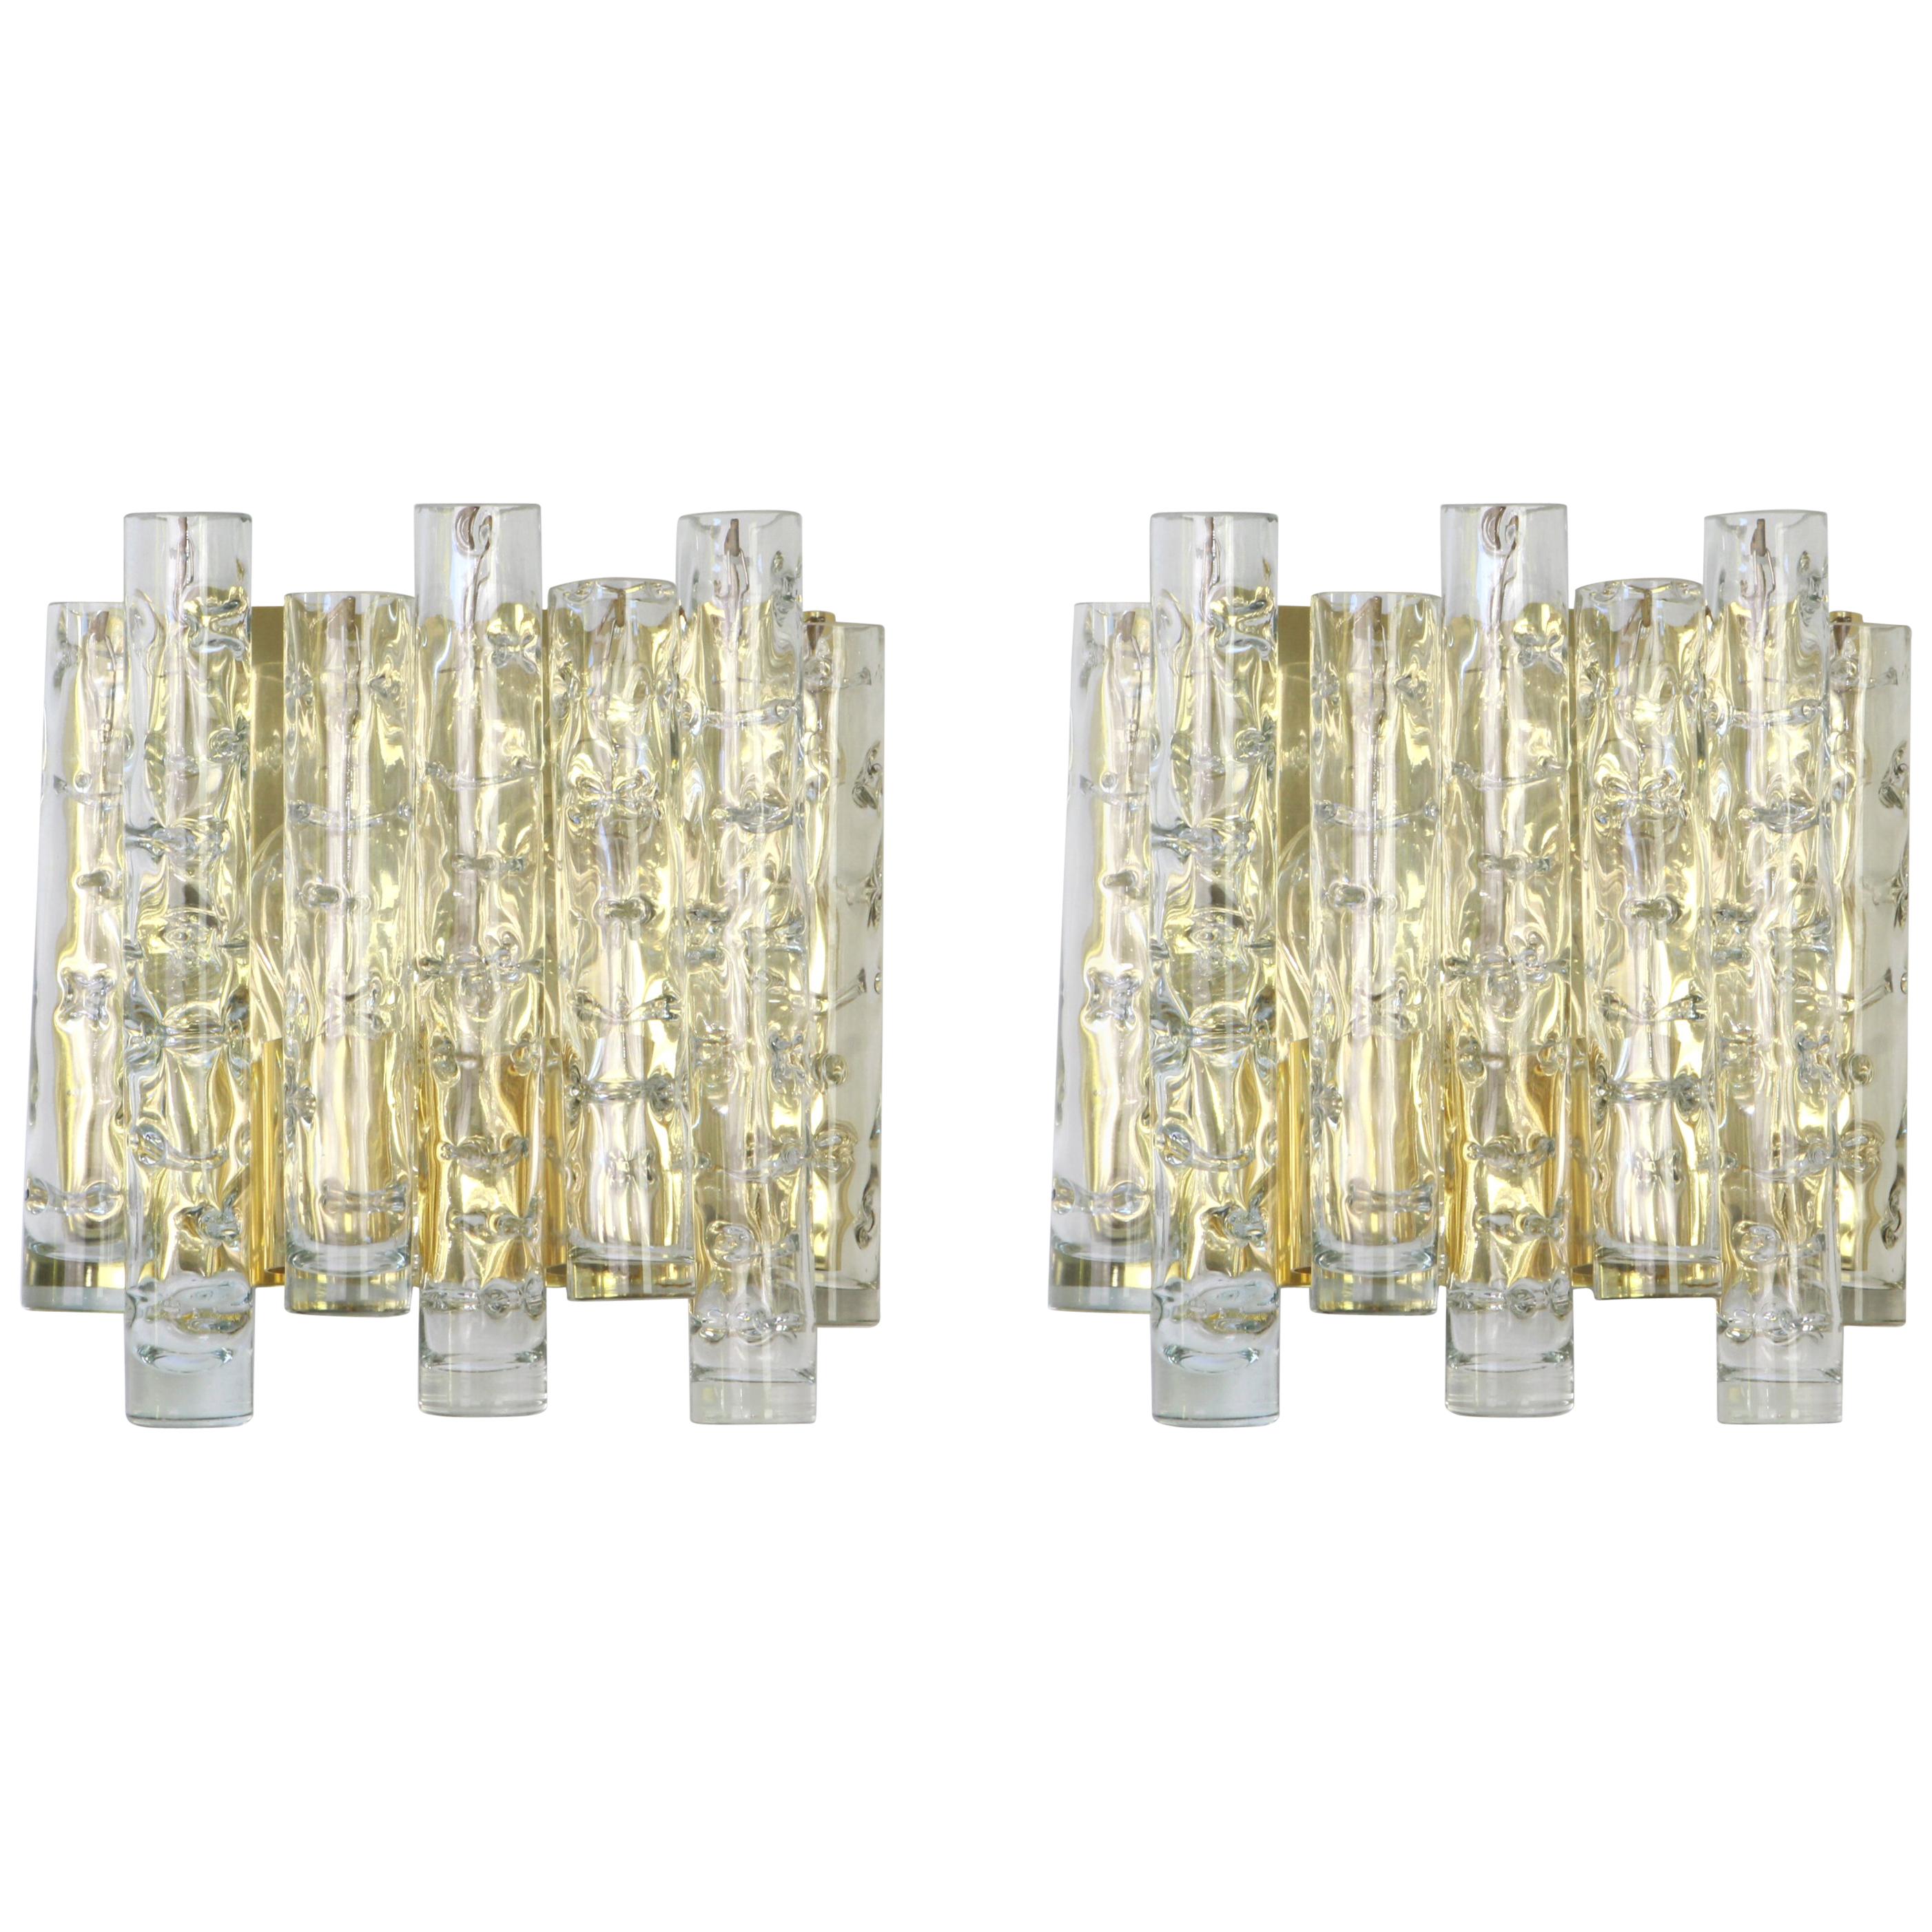 Pair of Large Murano Glass Wall Sconces by Doria, Germany, 1960s